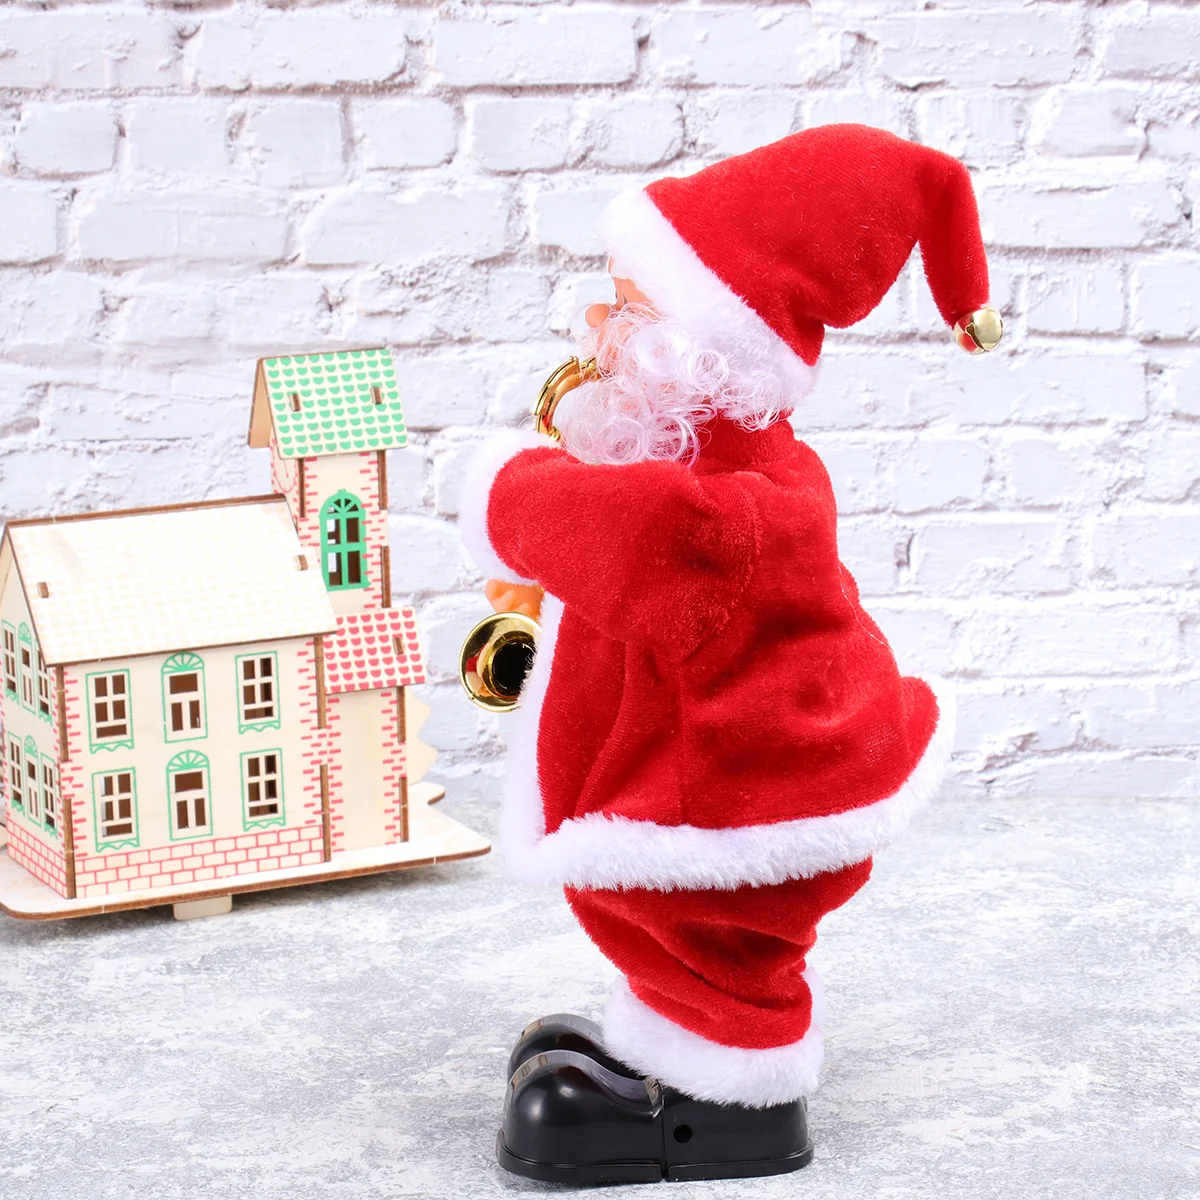 

Class Christmas Gifts 1Pc Christmas Toys, Santa Claus Toy Singing Dancing Santa Claus Animated Christmas Singing Santa Claus